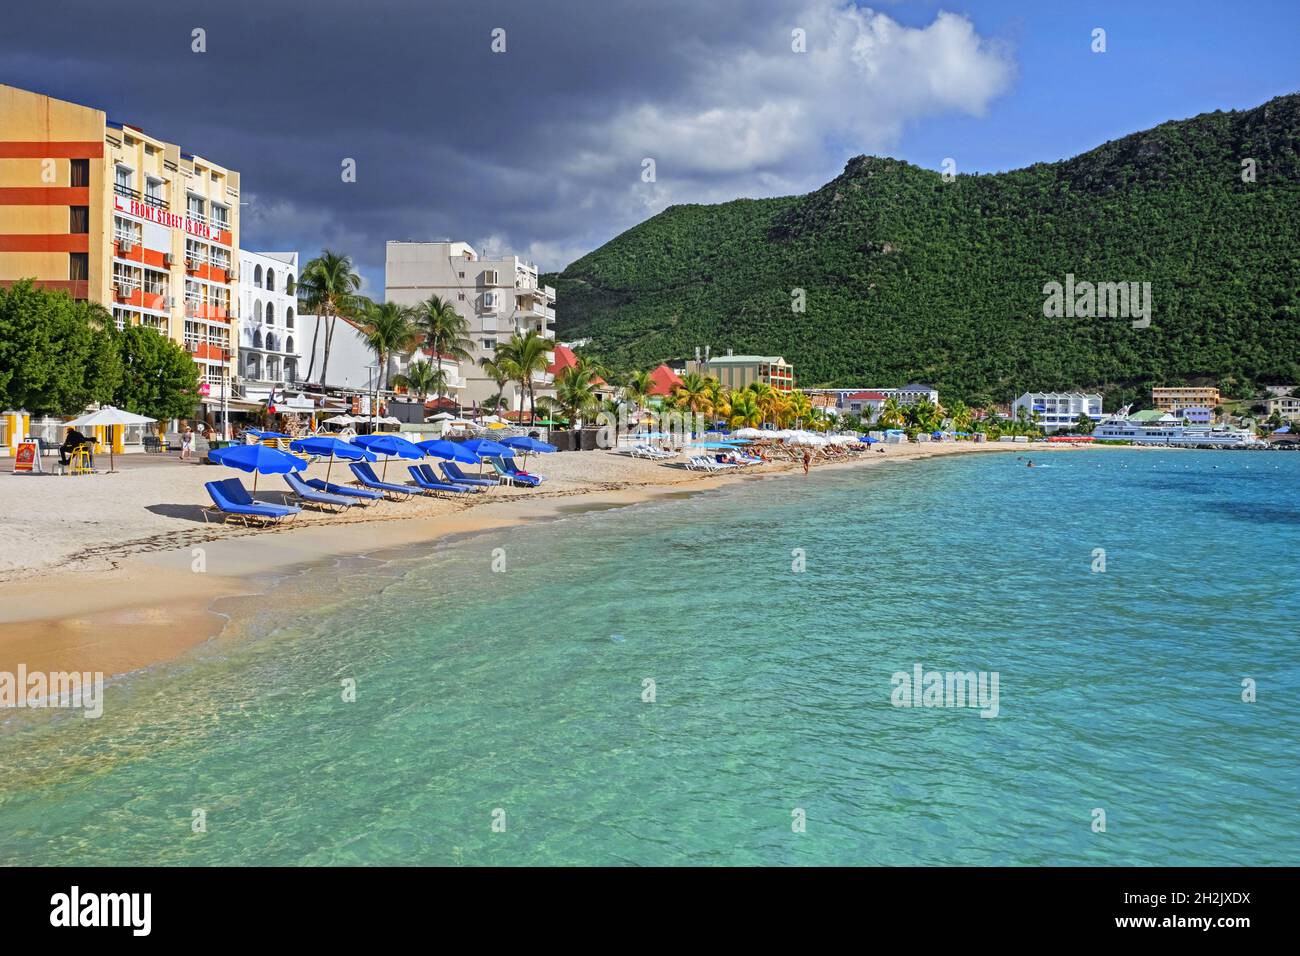 Tourists sunning on sandy beach with palm trees at Great Bay in capital city Philipsburg of the Dutch island part of Sint Maarten in the Caribbean Sea Stock Photo